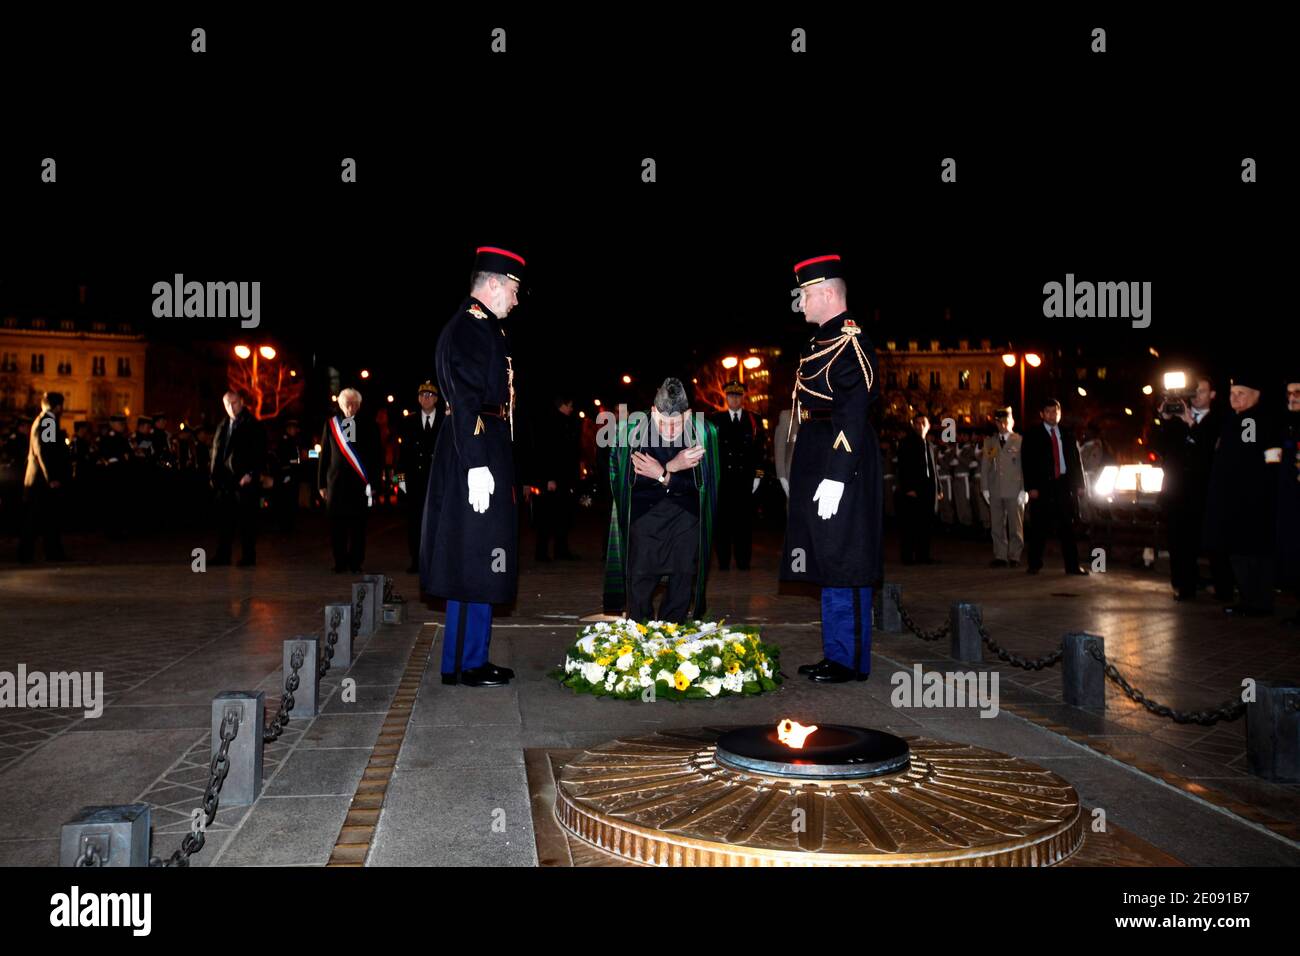 Afghan President Hamid Karzai is pictured during a ceremony in front of the Unknown soldier's tomb, at the Arc of Triomphe, Paris, France on January 27, 2012. Photo by Hamilton/Pool/ABACAPRESS.COM Stock Photo